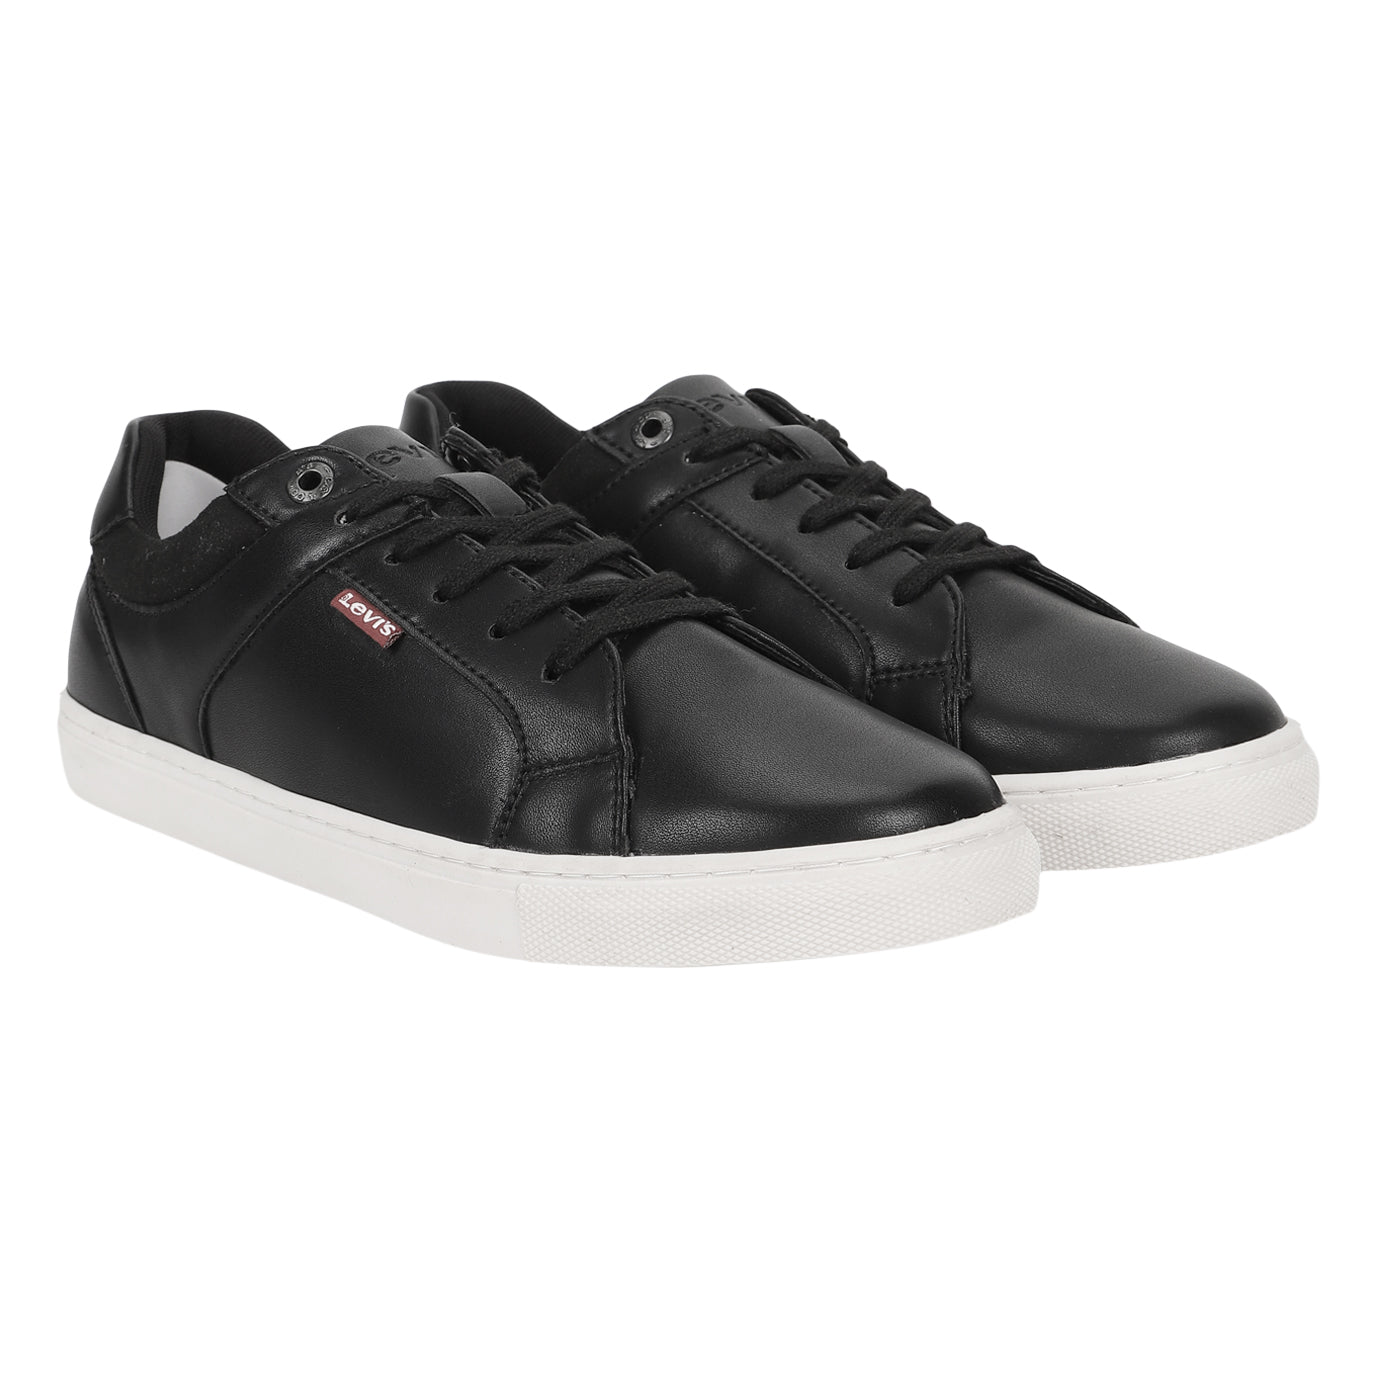 PUMA Platinum Wns Training & Gym Shoes For Women - Buy PUMA Platinum Wns  Training & Gym Shoes For Women Online at Best Price - Shop Online for  Footwears in India | Flipkart.com